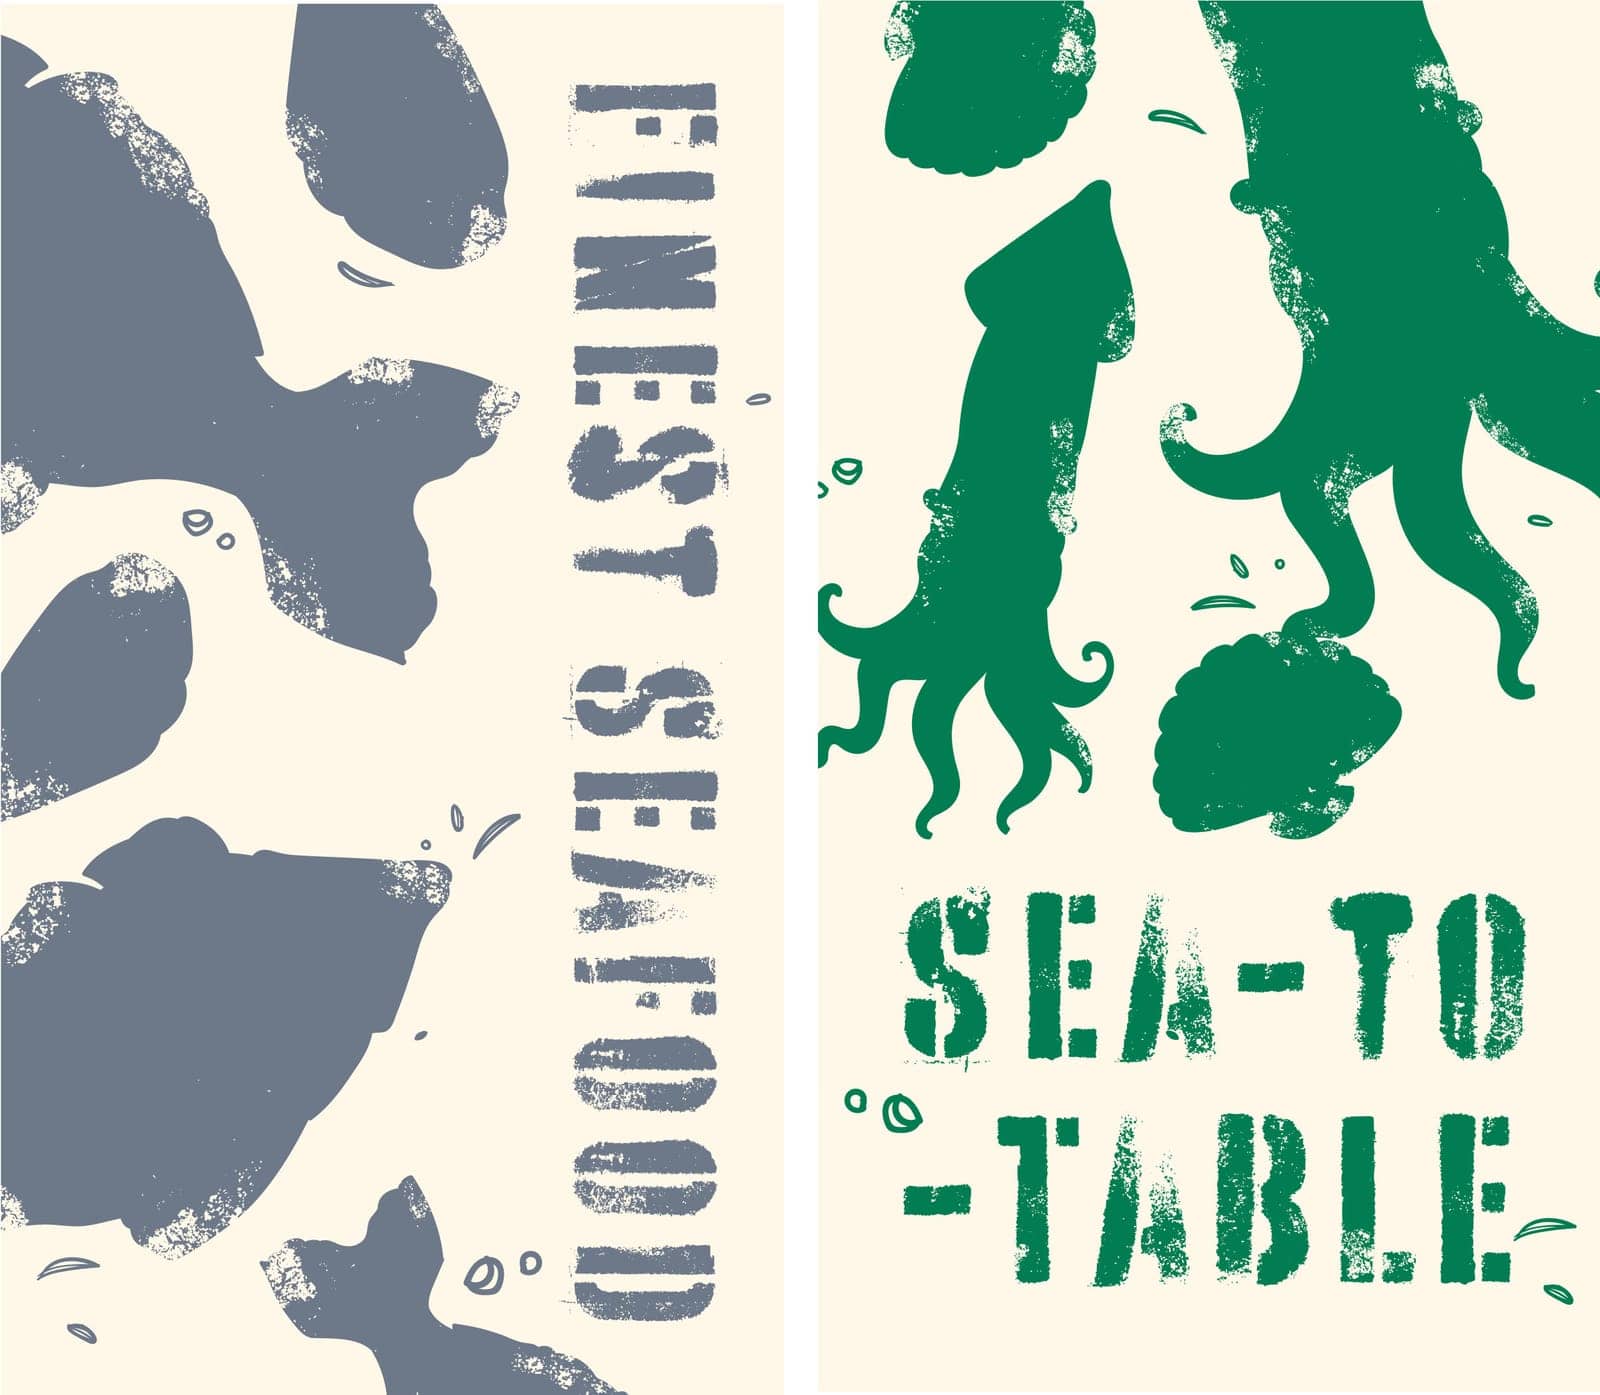 Event poster vector celebrating sea practices, featuring squid and shellfish, ideal for eco-conscious markets.